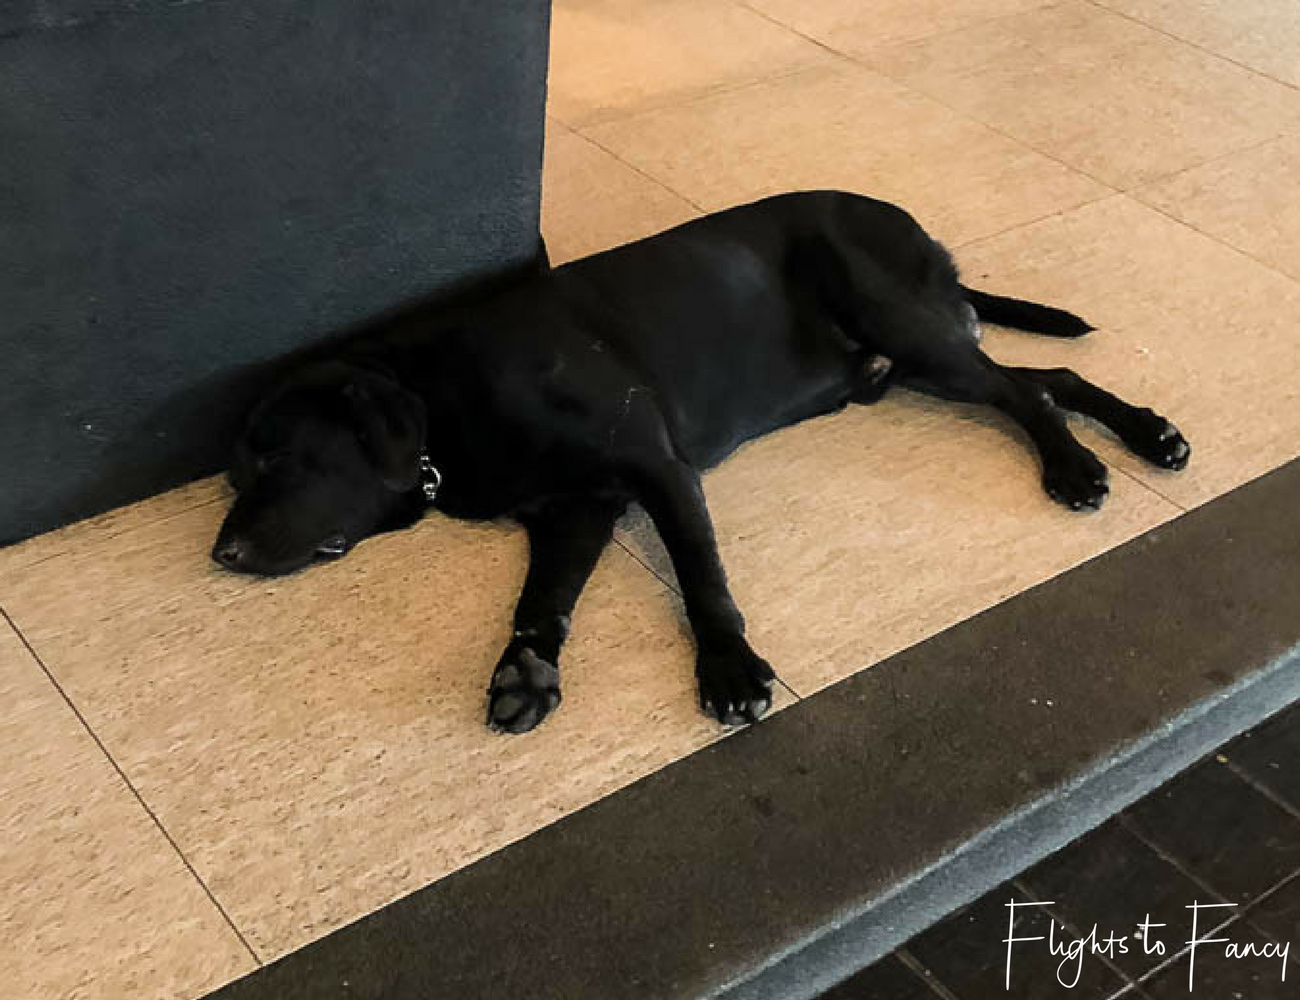 Flights to Fancy - Fairmont Makati security dog